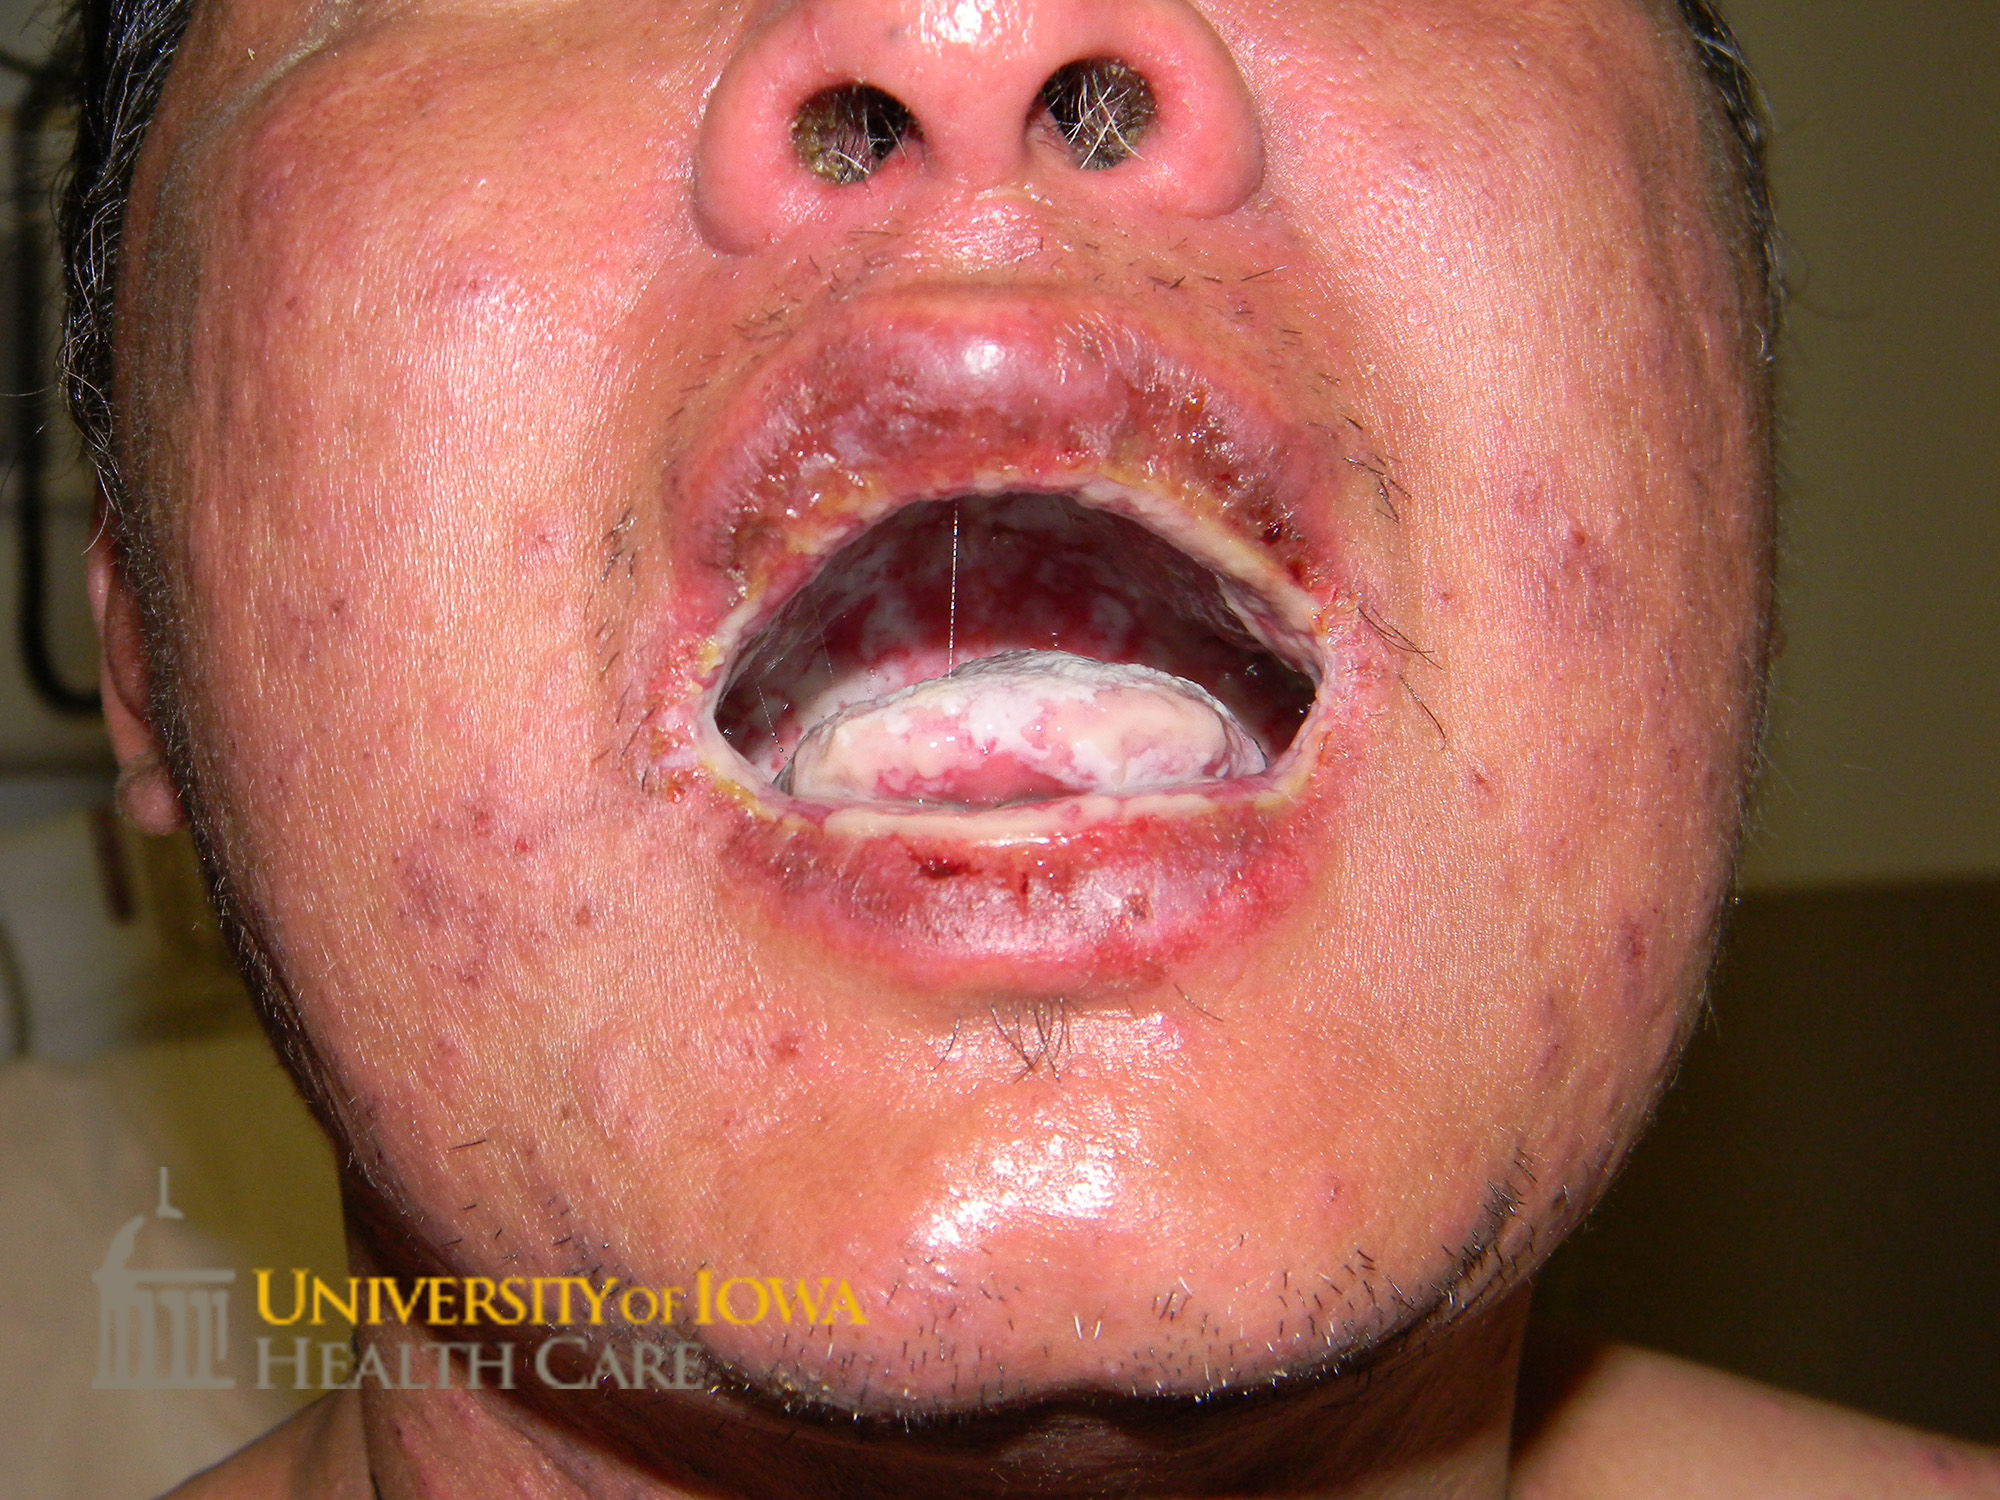 White plaques on the tongue and roof of the mouth with heme crusting of the lips. (click images for higher resolution).